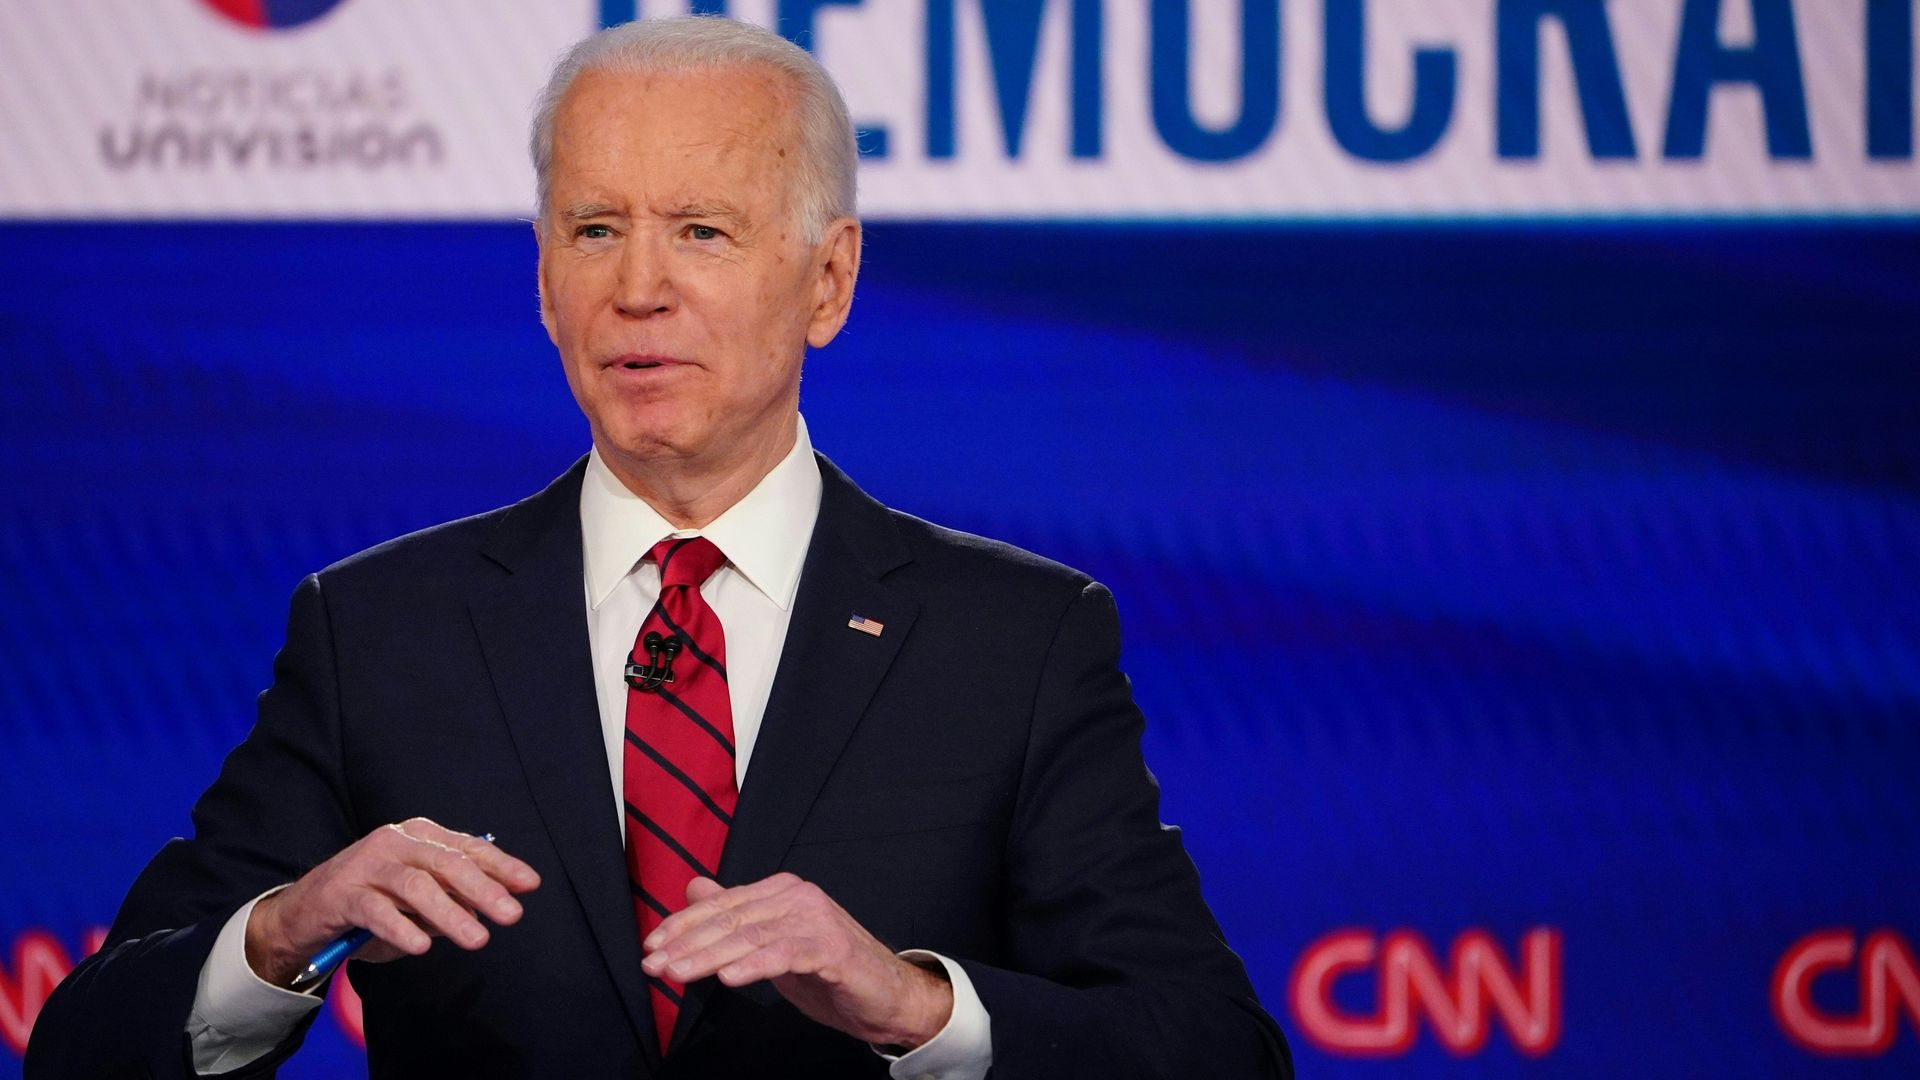 In this image, Biden stands on a debate stage and talks